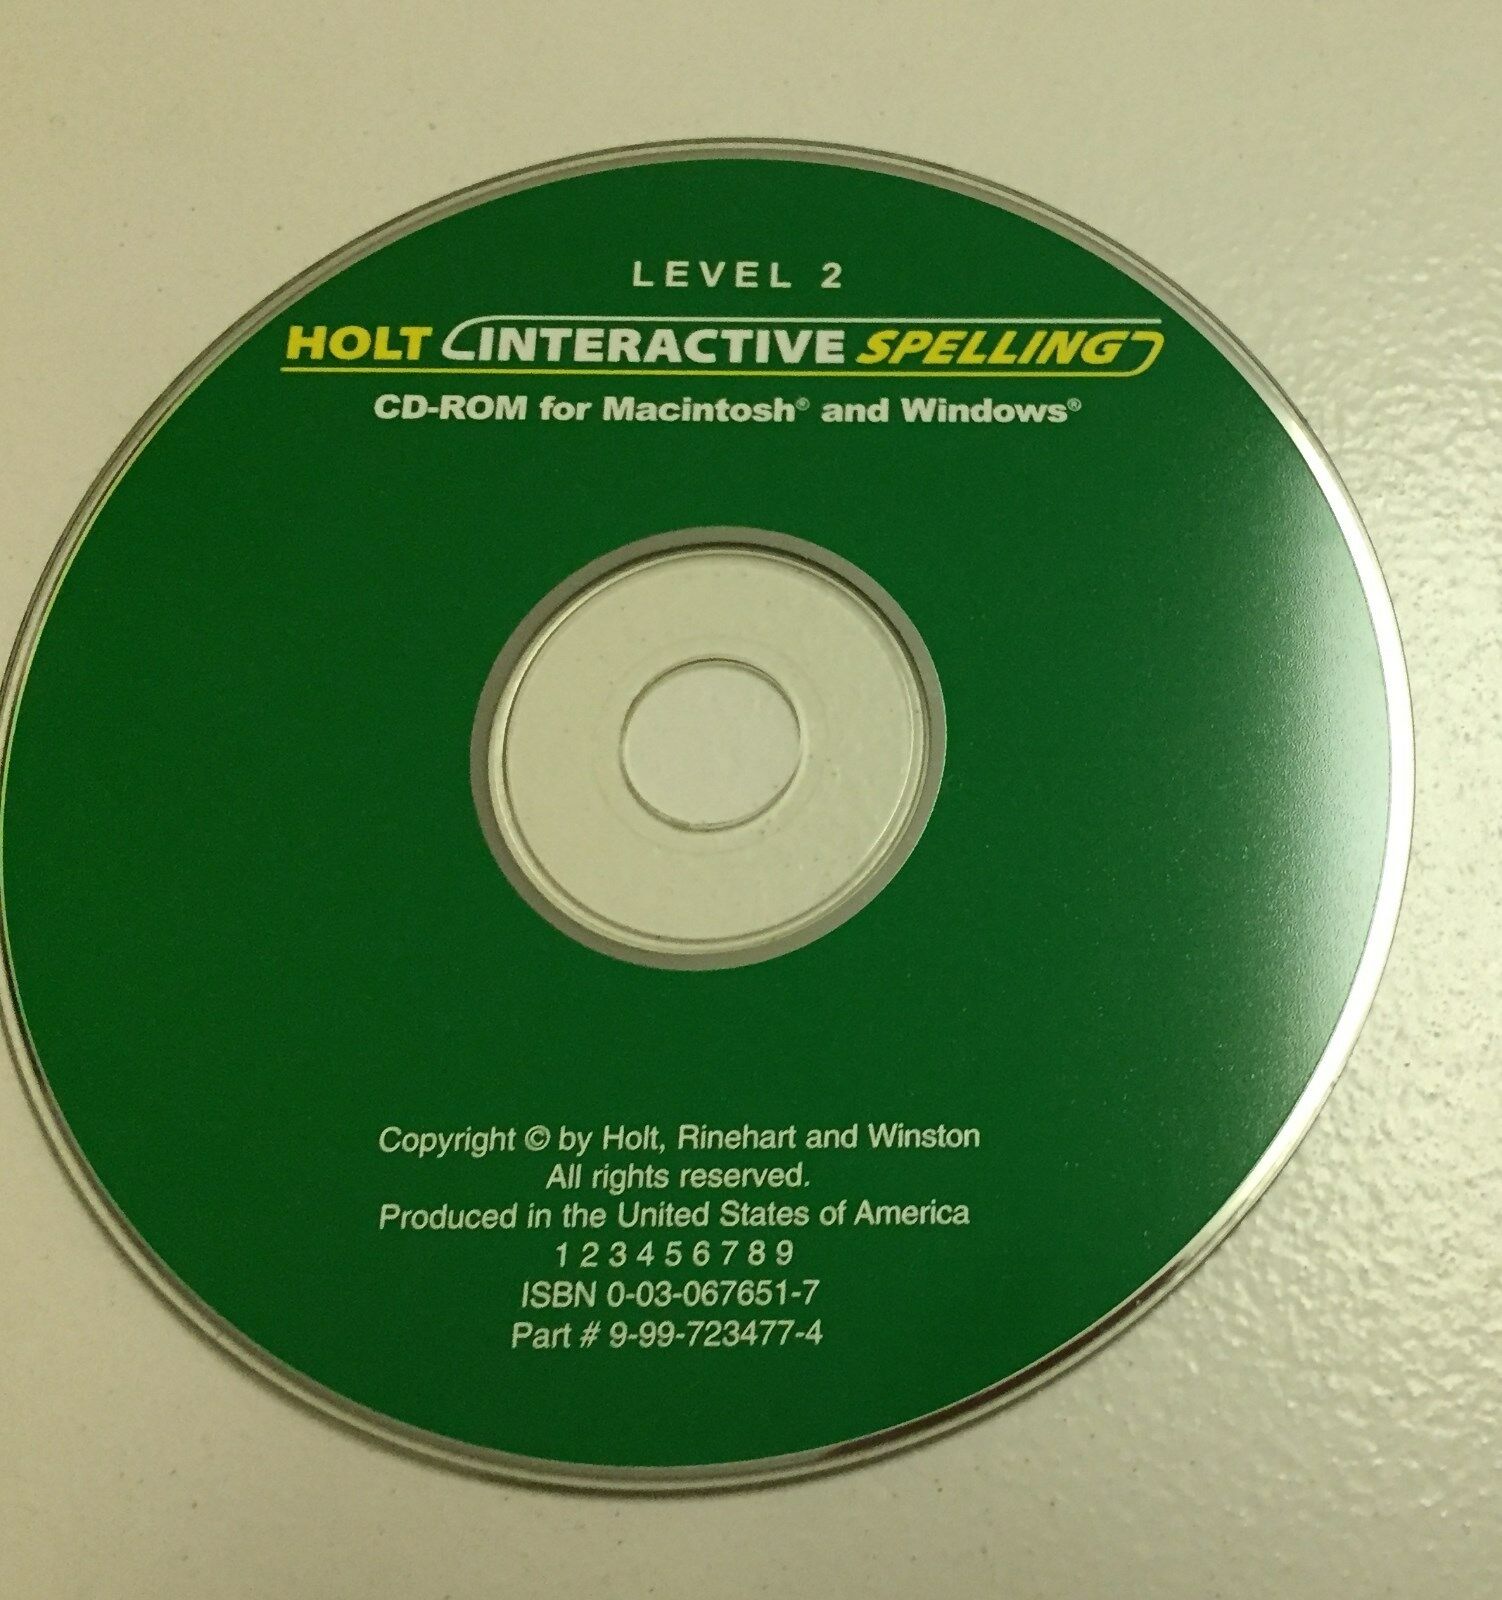 Holt Interactive Spelling - Level 2 Cd